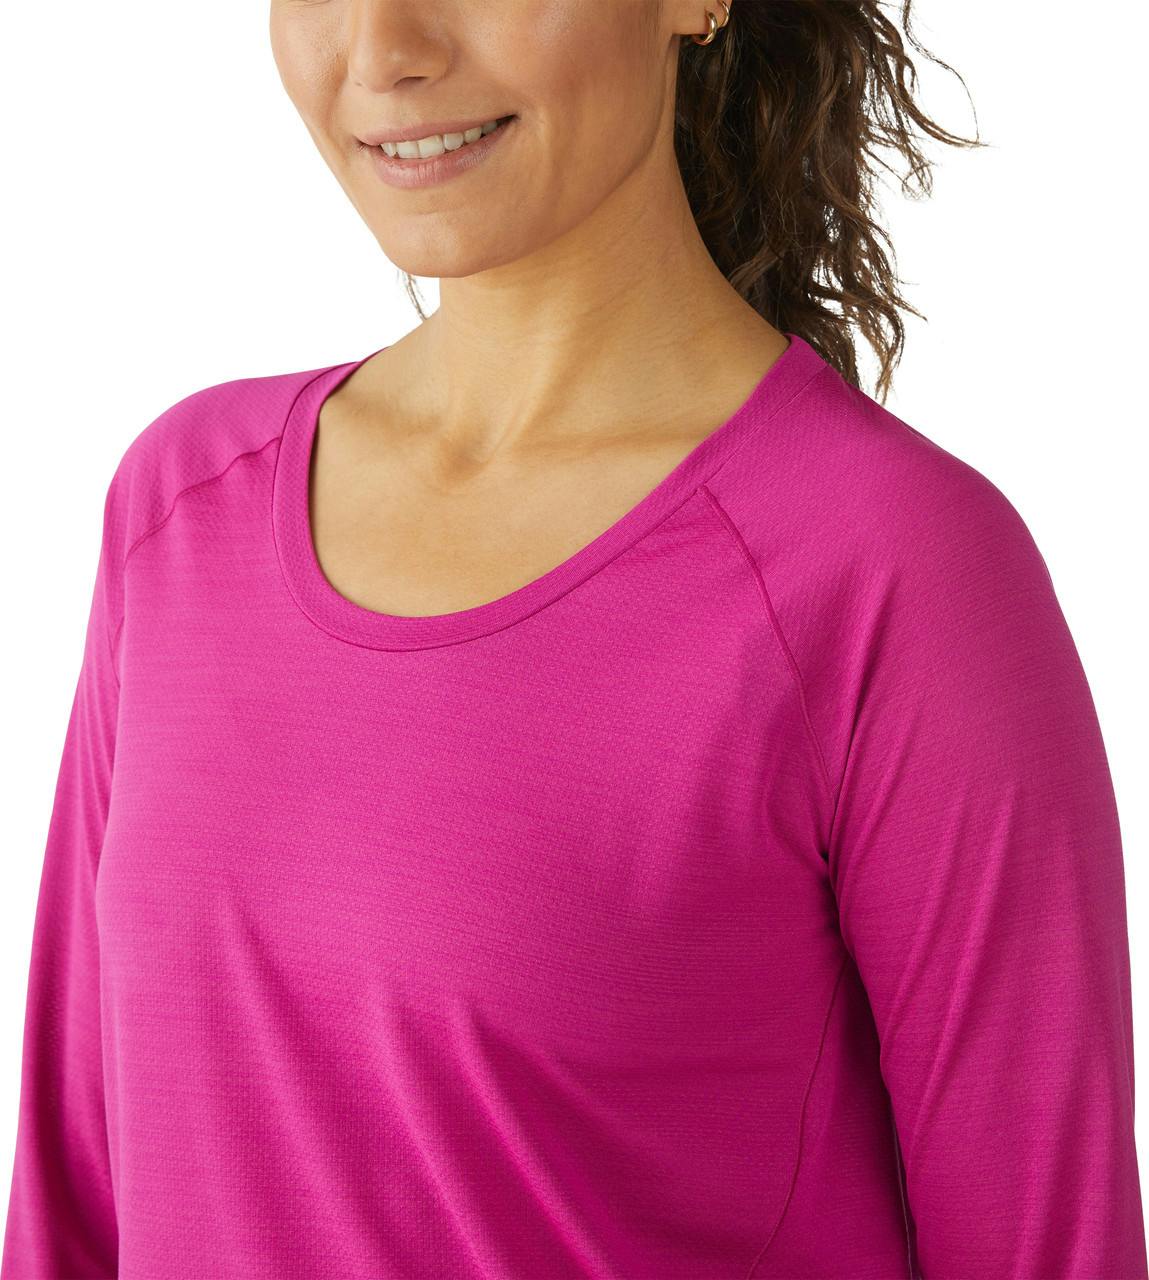 Core Train Long Sleeve T-Shirt Passion Pink Heather